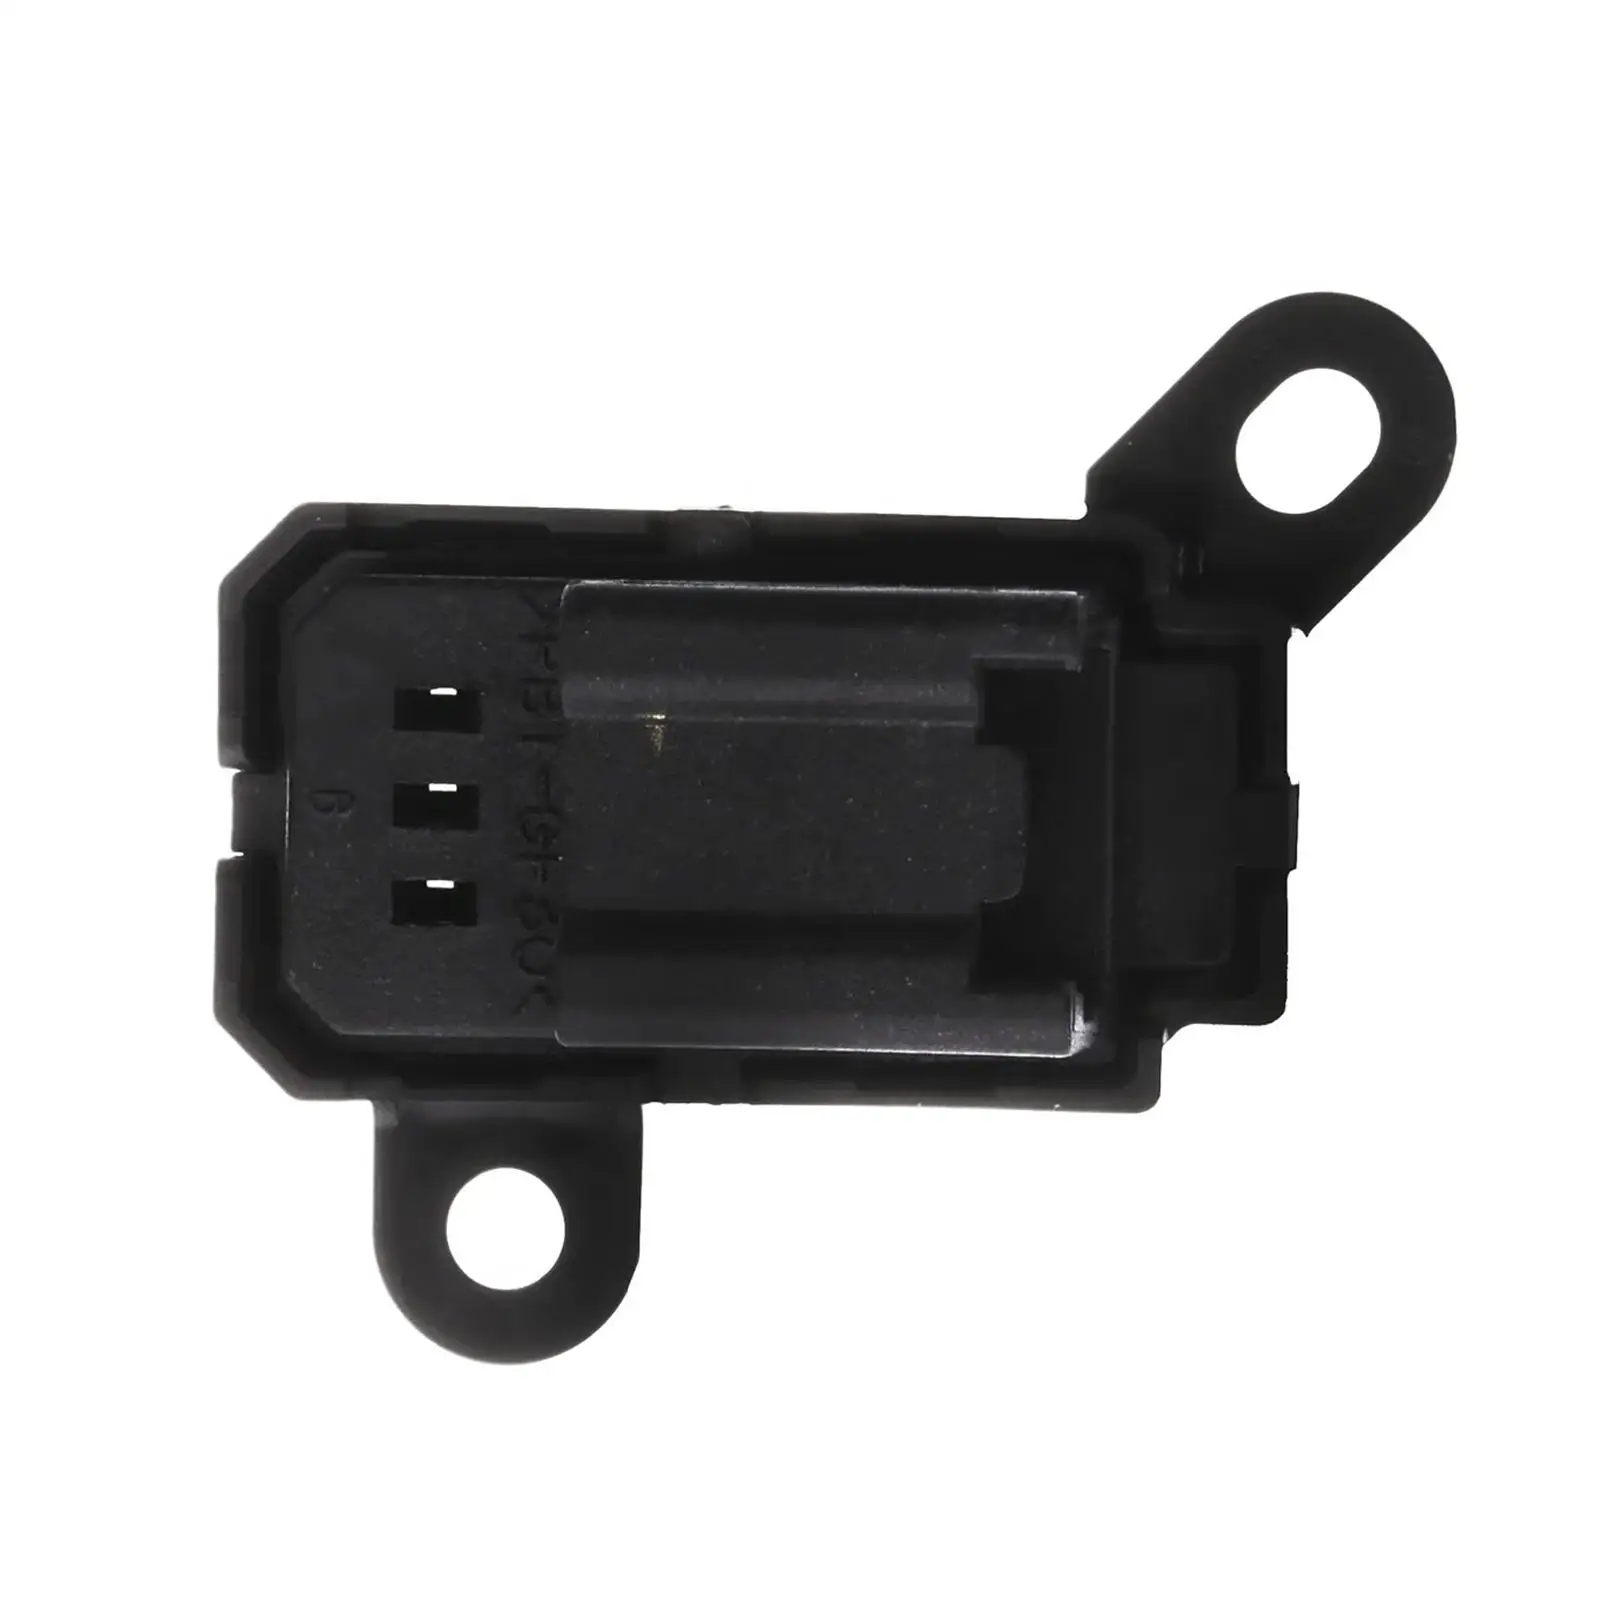 Gea3-66-660 Spare Parts Premium Driver LH Front Door Lock Switch Button Car Accessories Replaces for Mazda CX-7 2010-2012